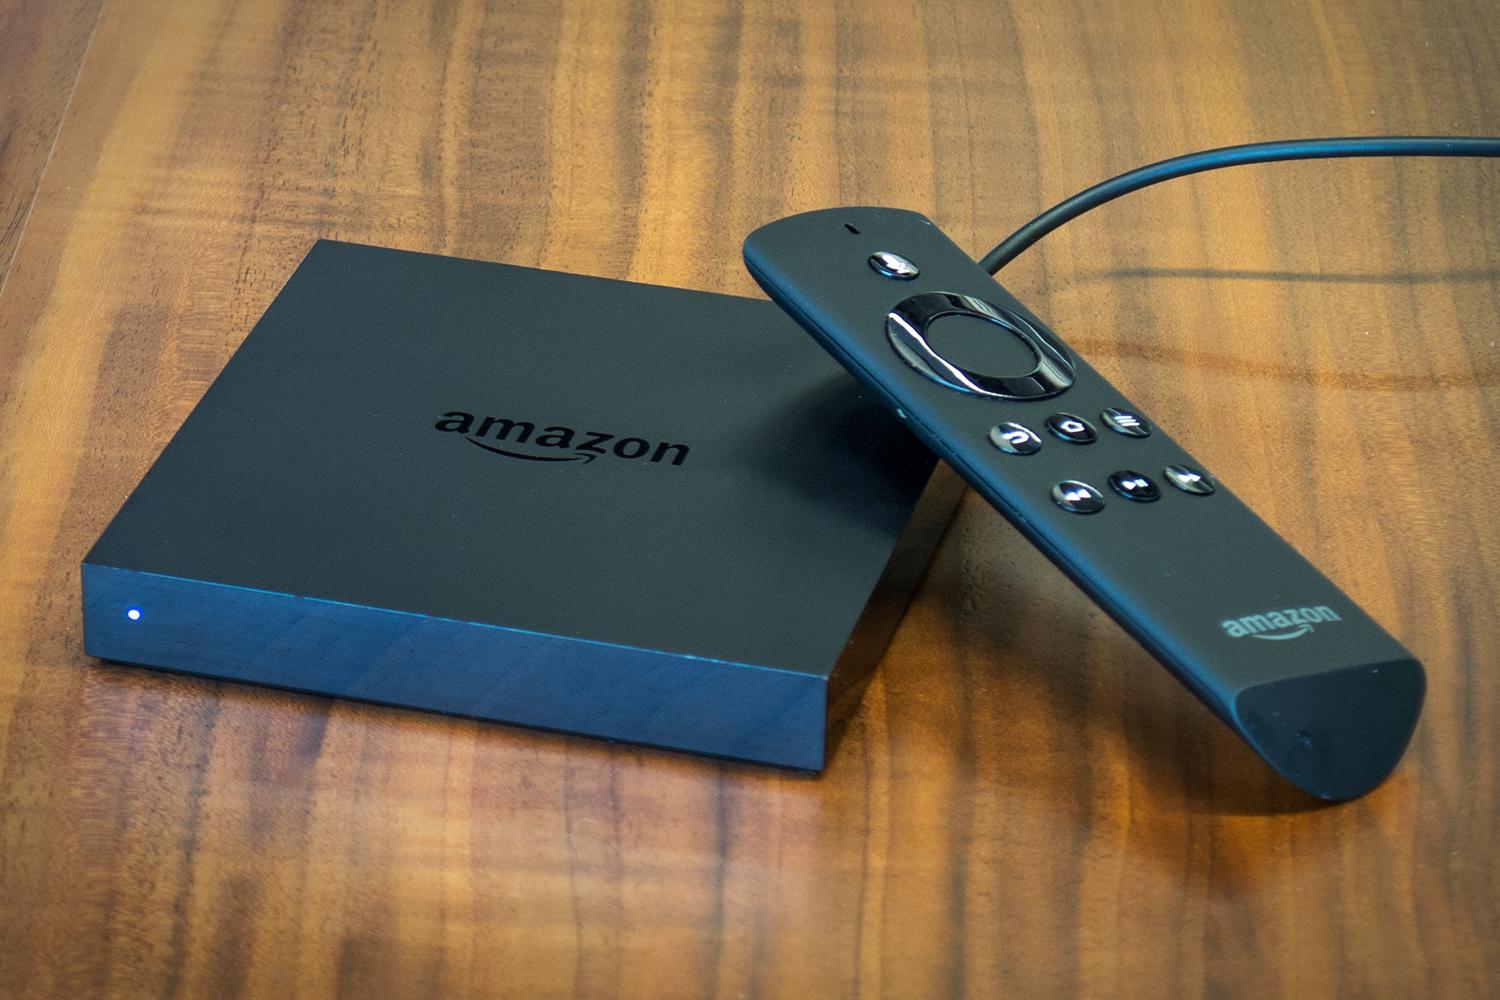 Walmart challenges 4K Fire Stick and Chromecast with $20 Google TV box